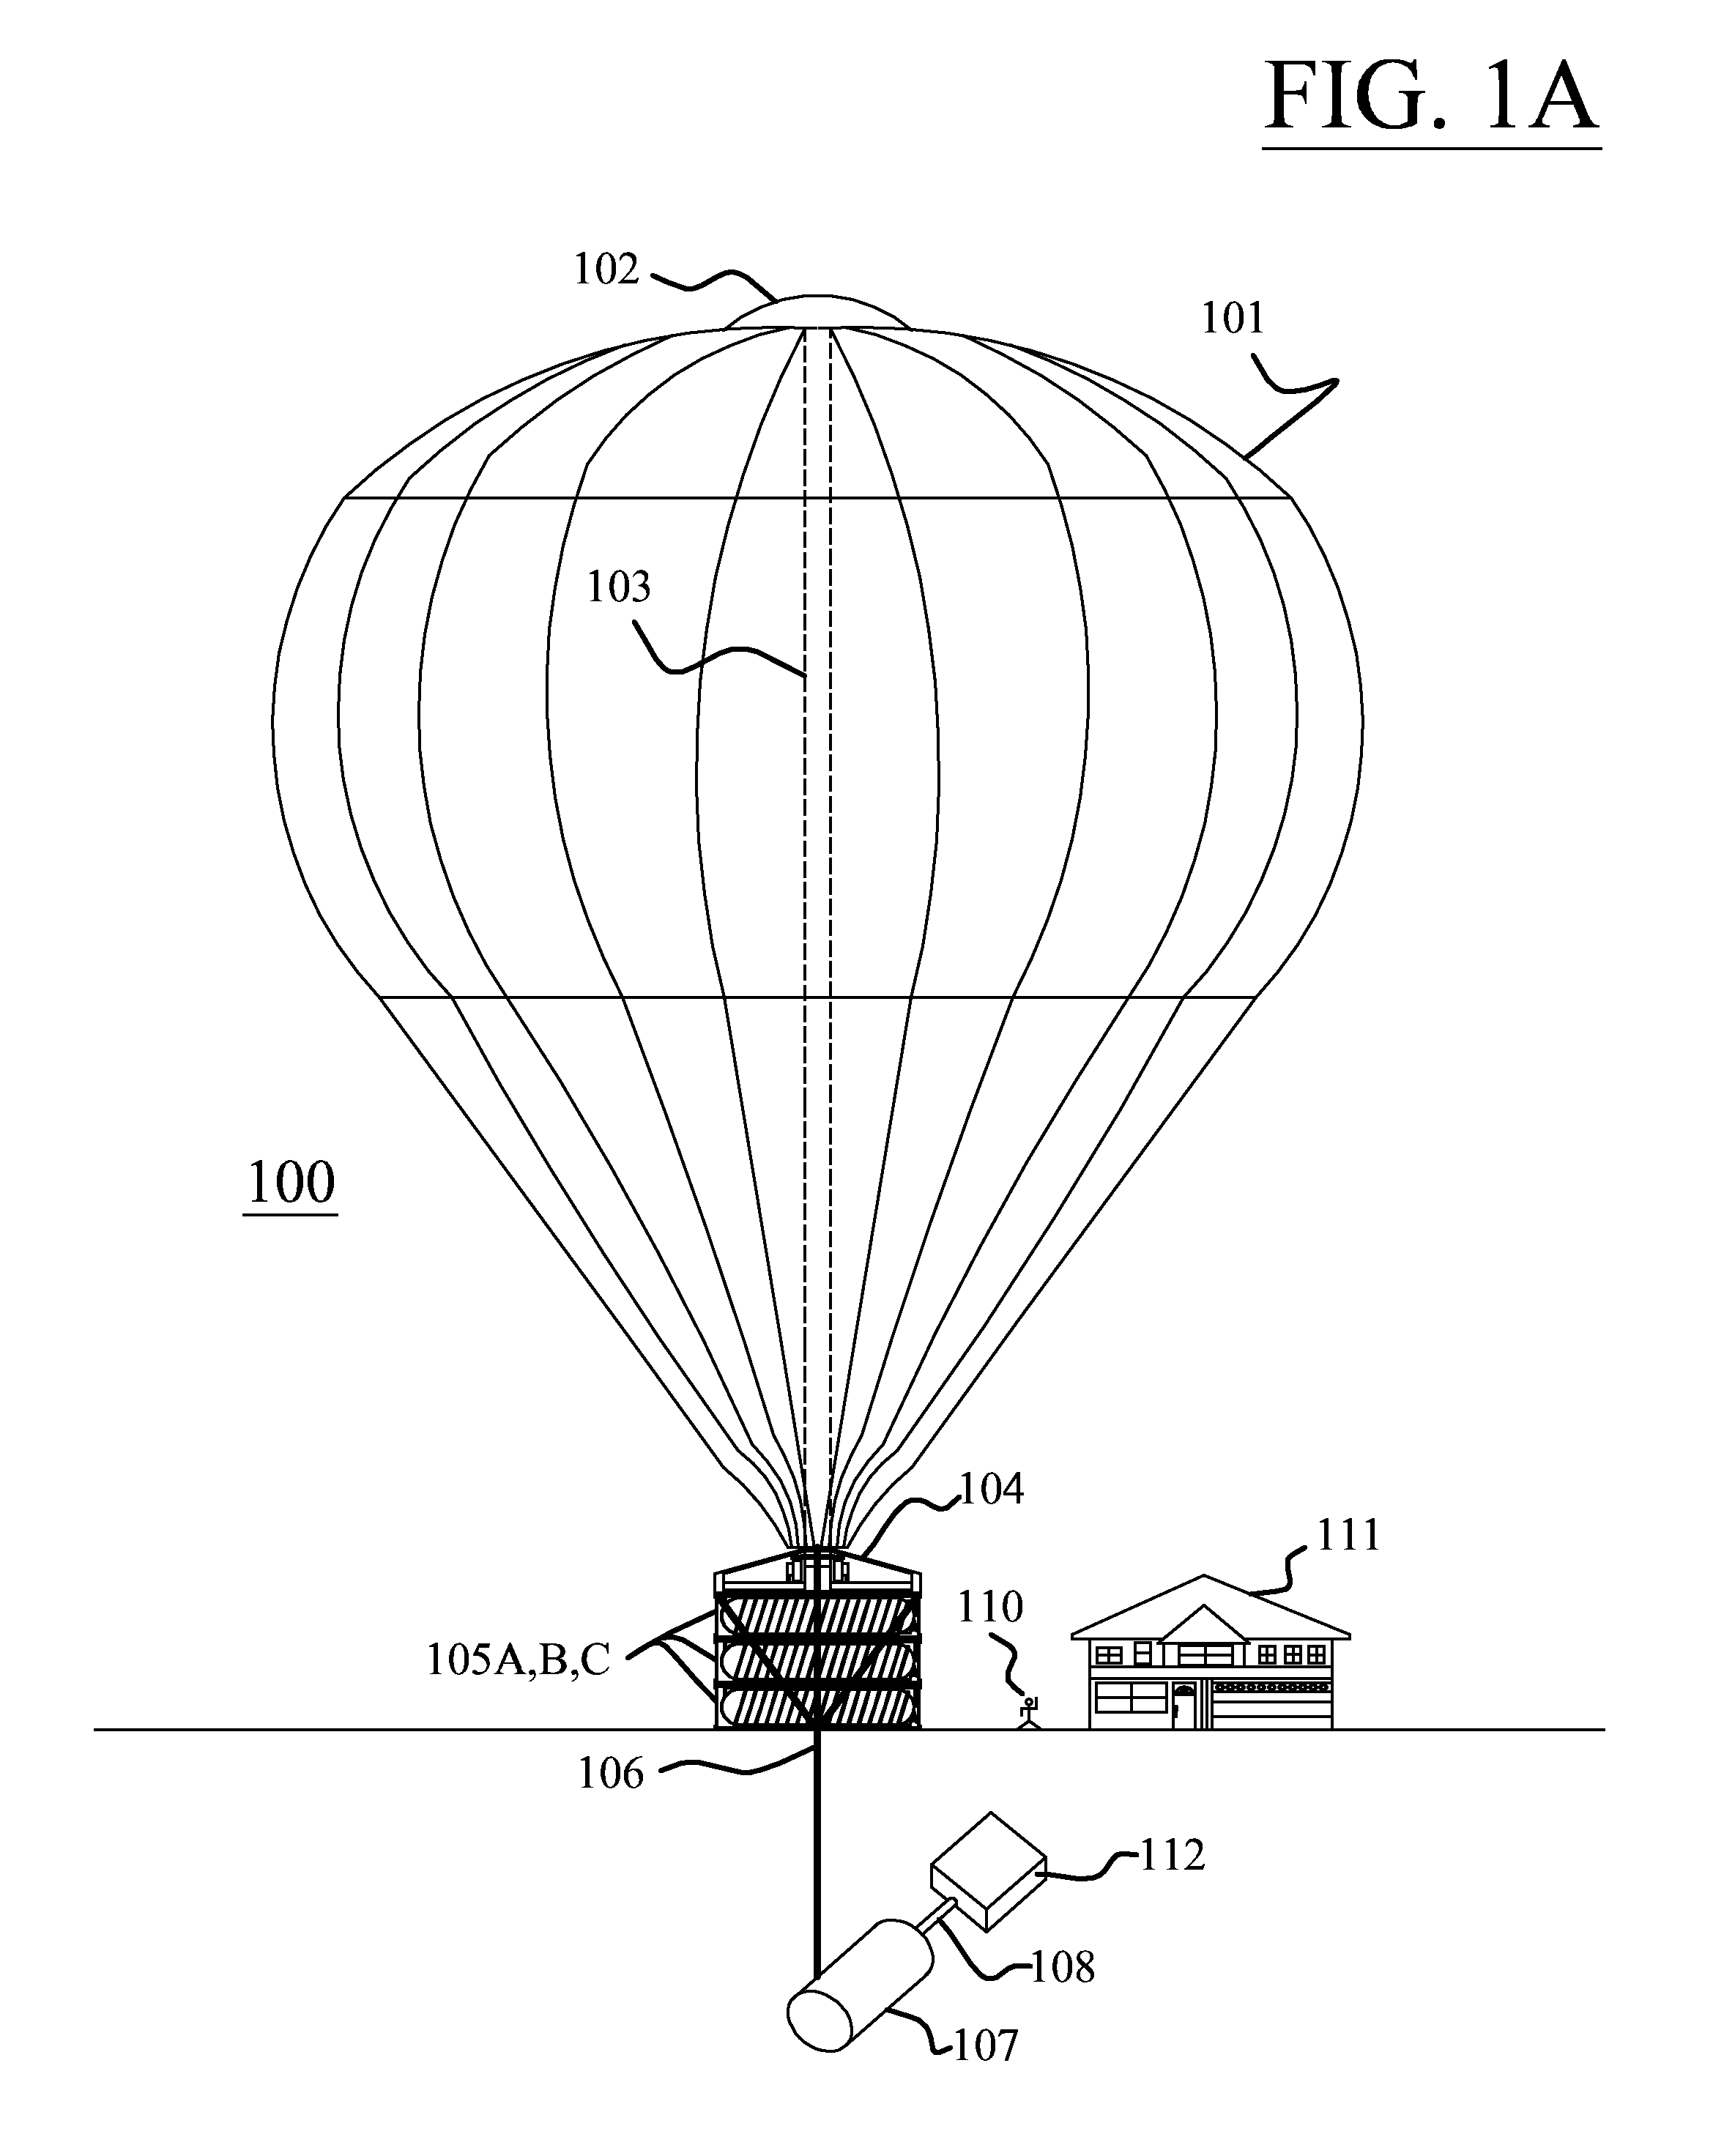 Atmospheric lapse rate cooling system